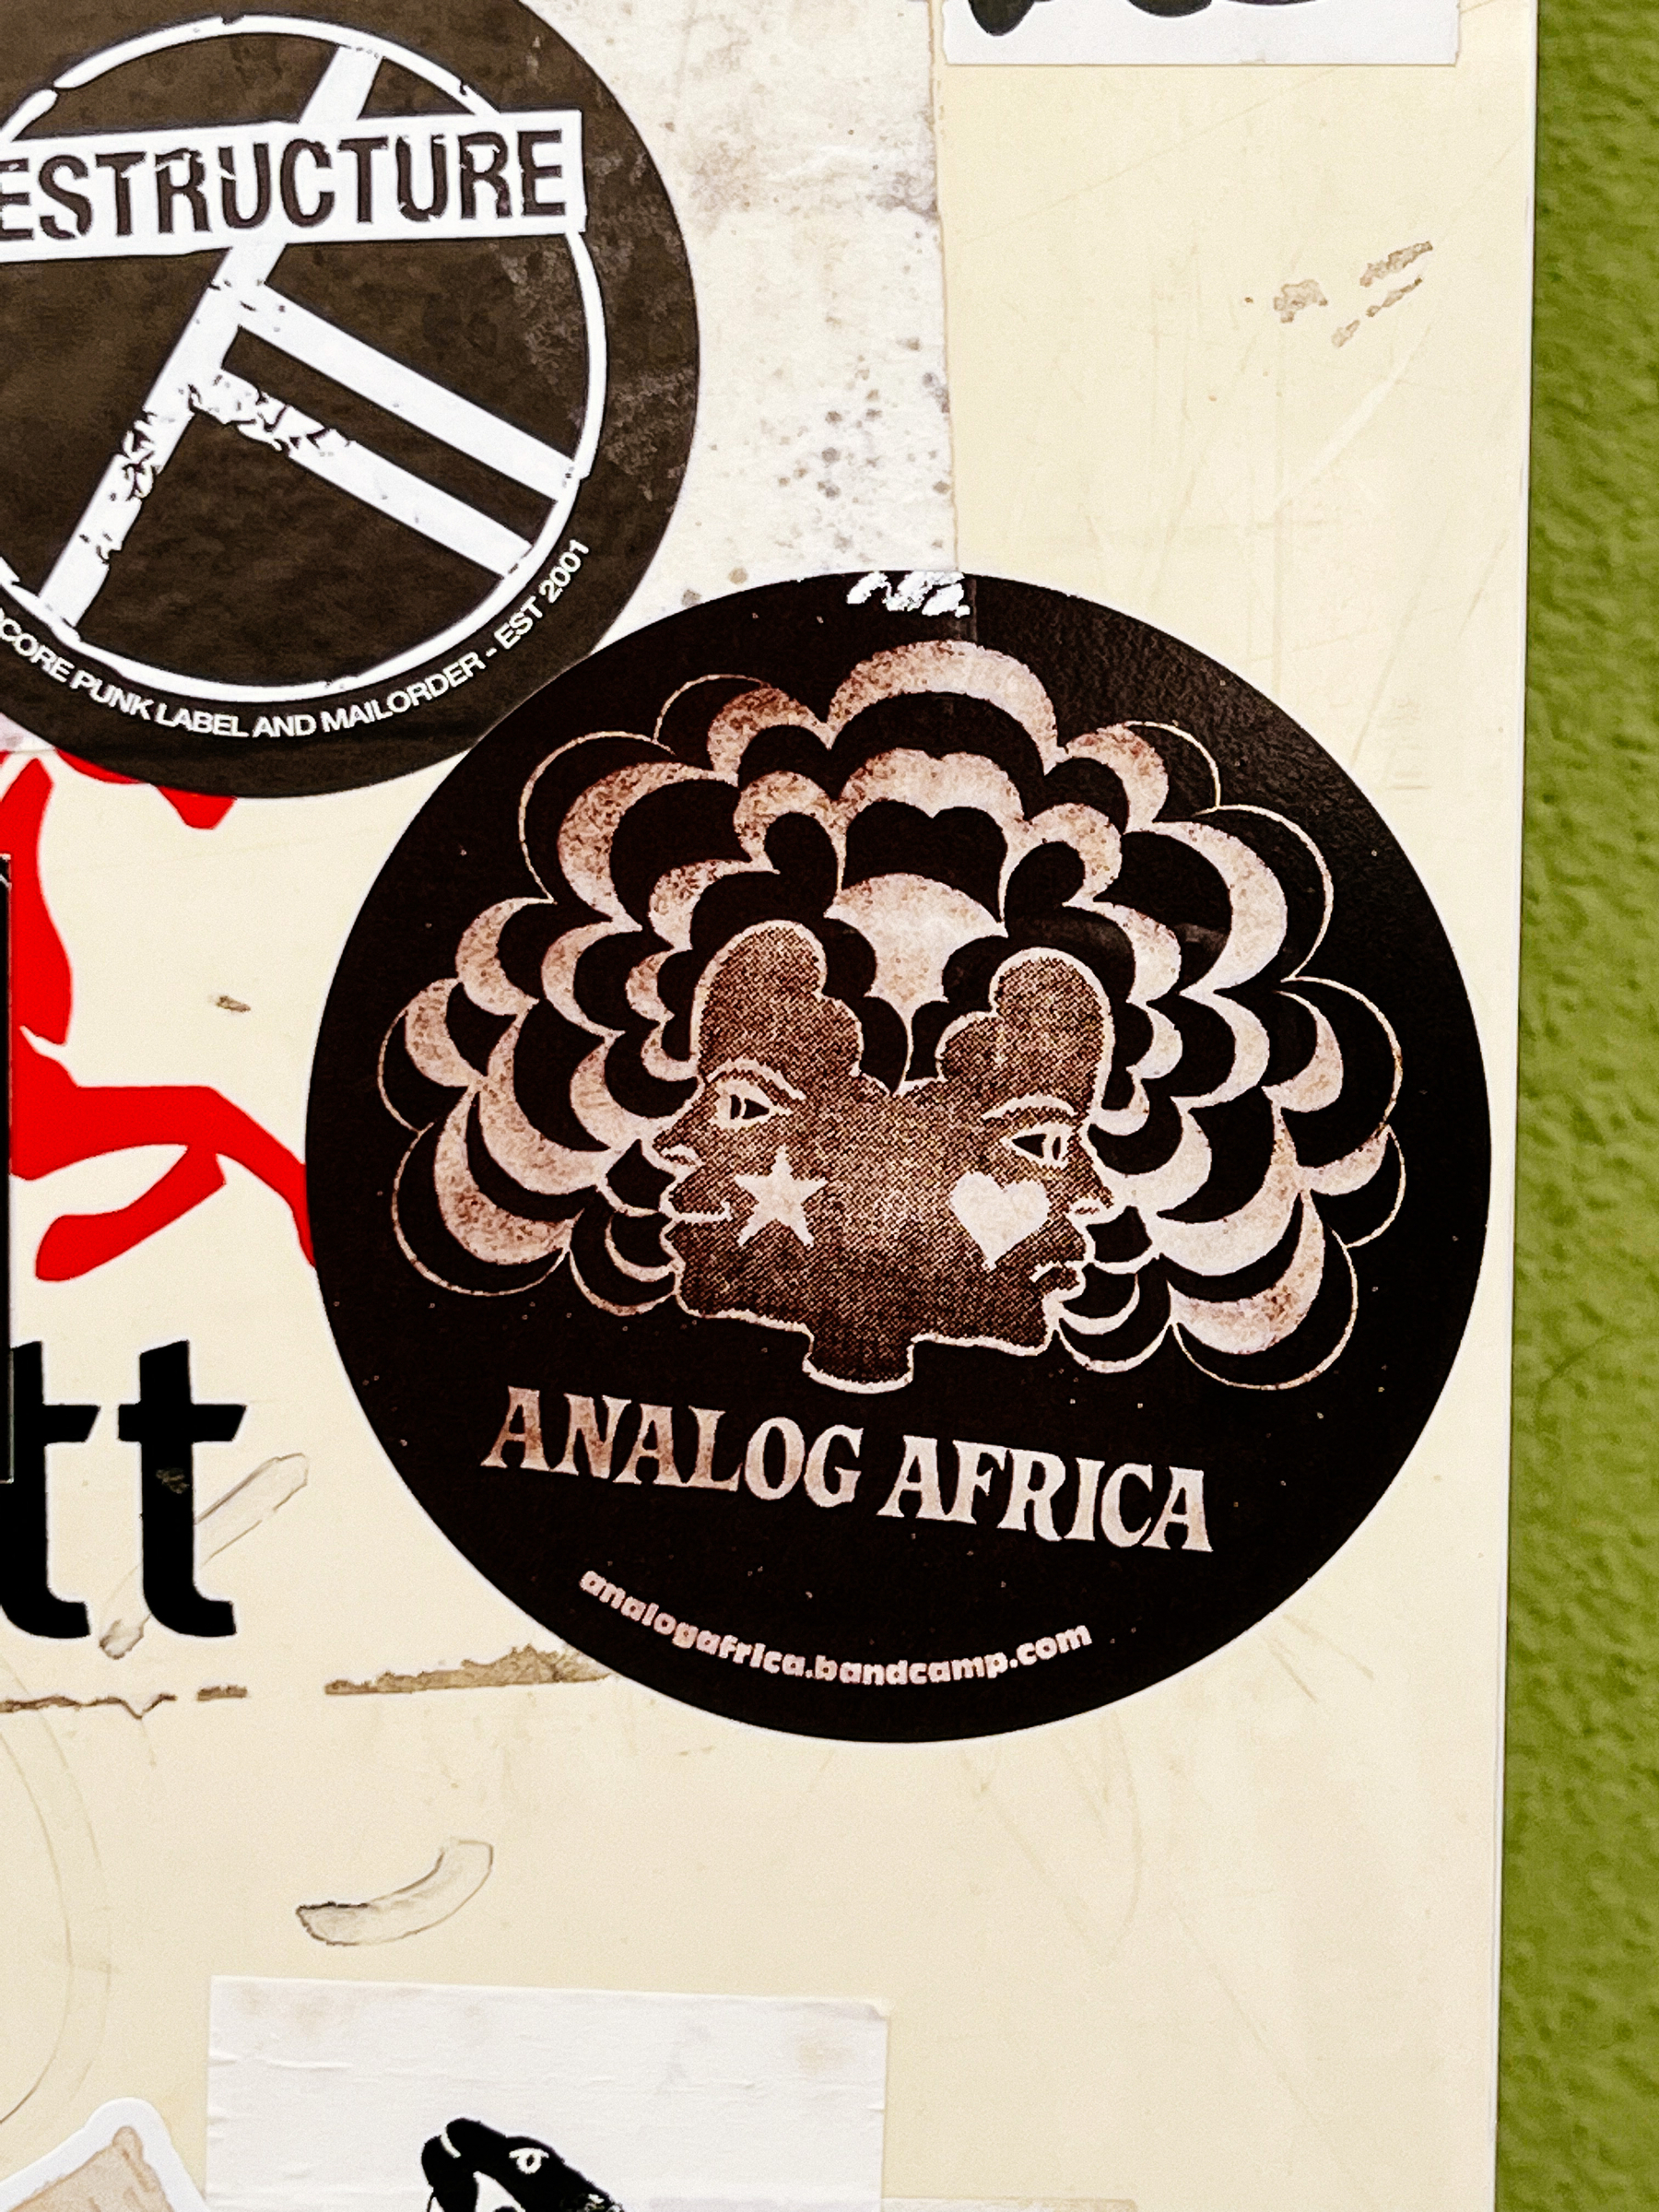 Sticker for “Analog Africa”, with a two faced women design. On one cheek there’s a star, on the other a heart. 